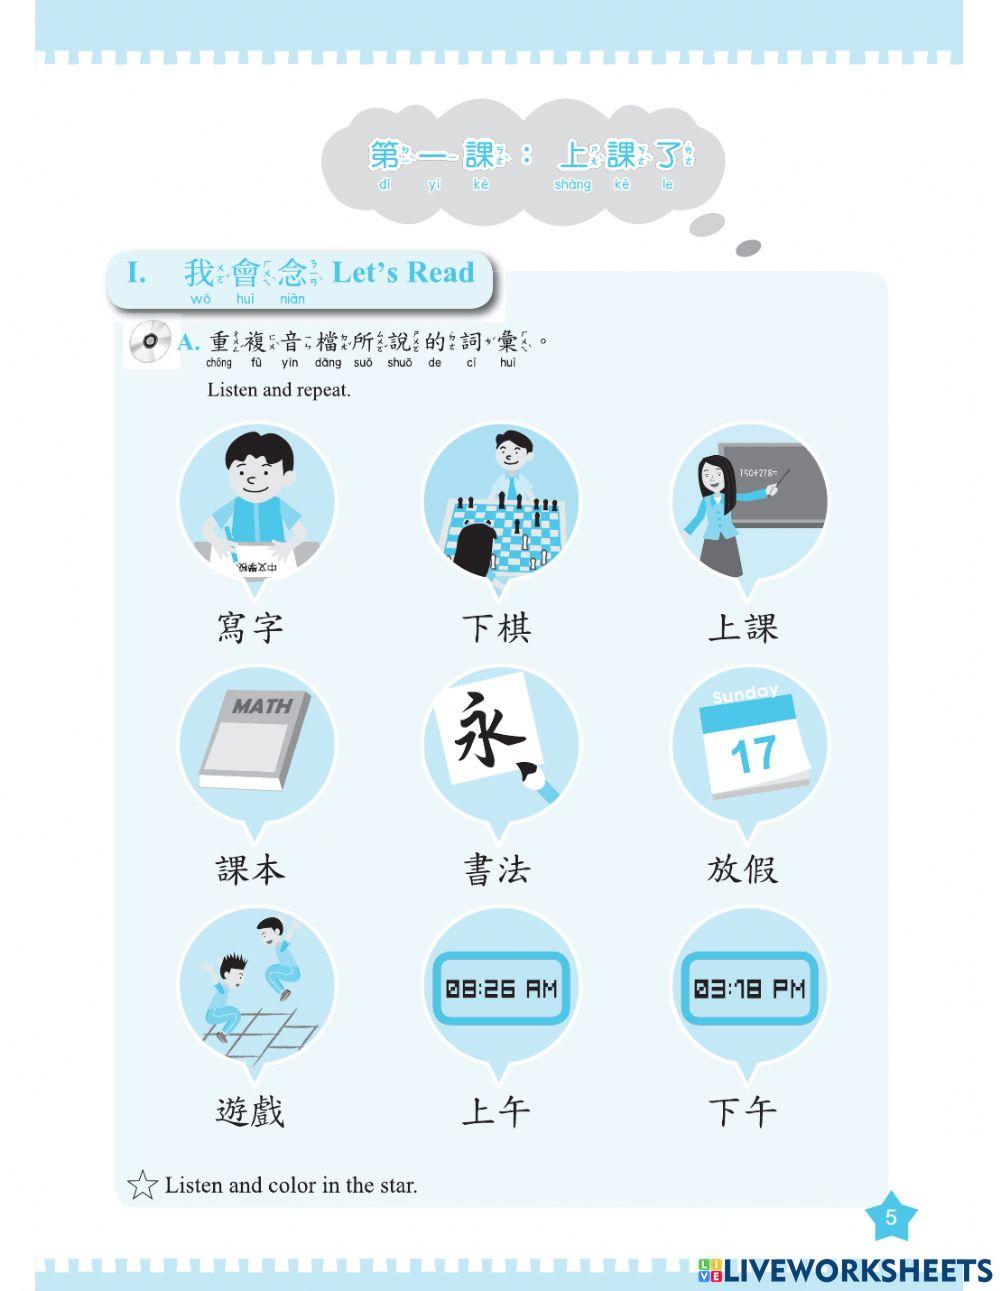 Let's Learn Chinese B3L1 Vocabs